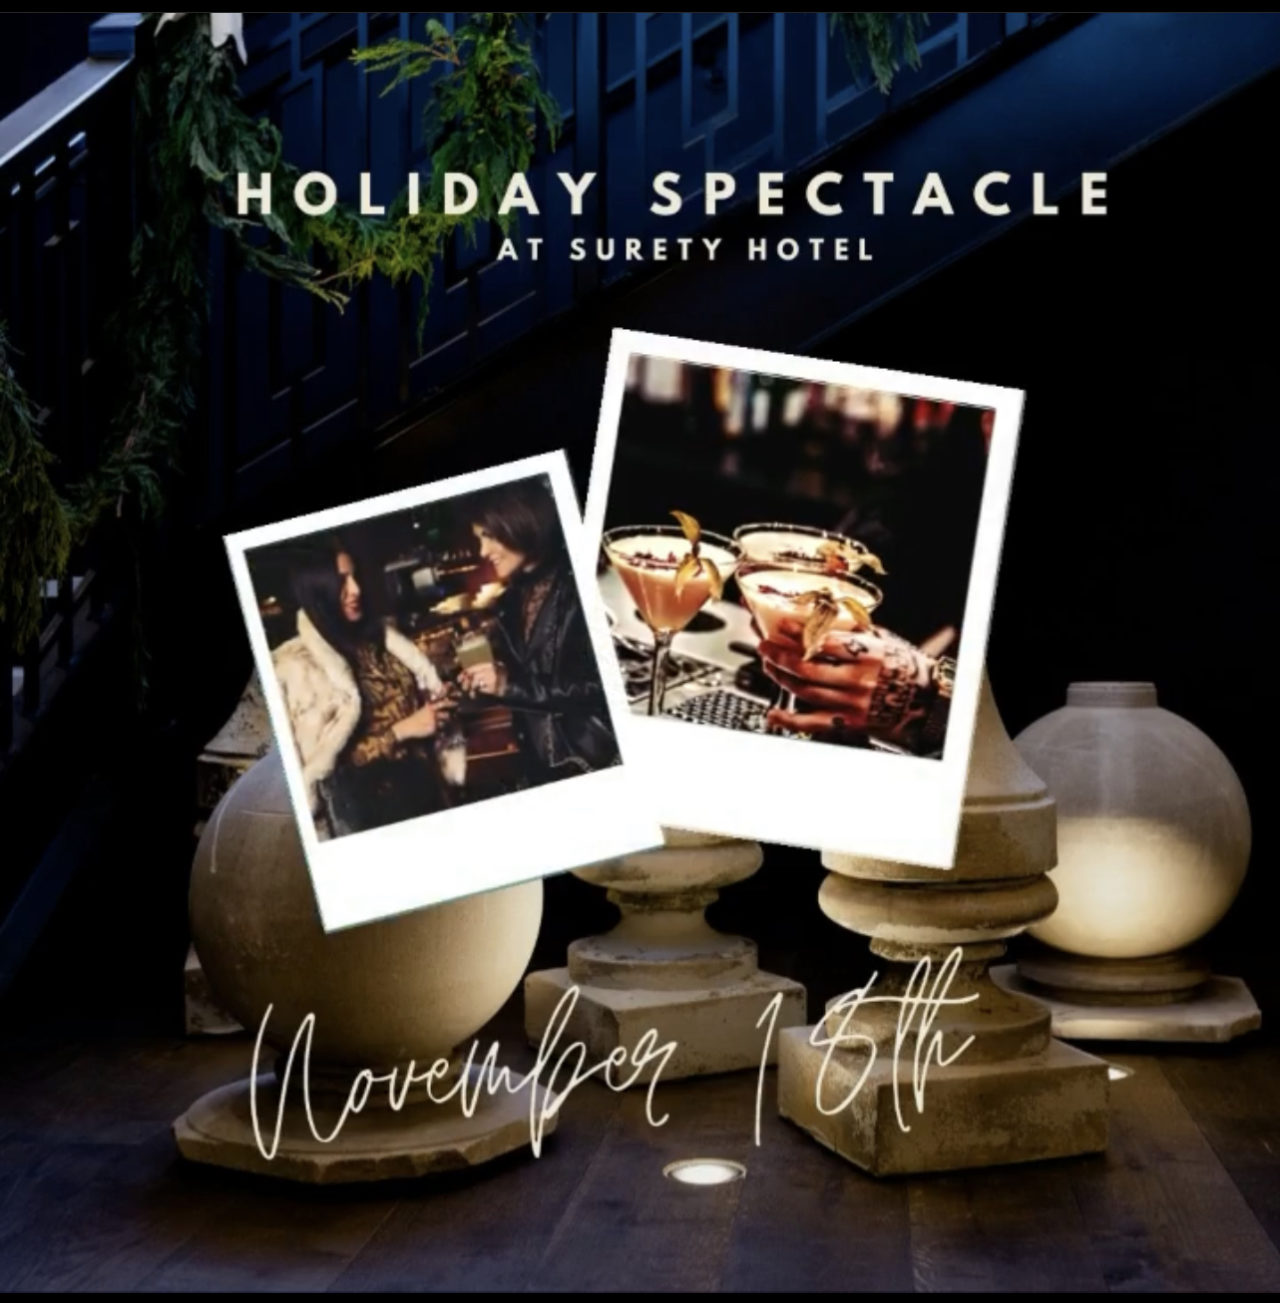 Holiday Spectacle at Surety Hotel November 18th flyer with two polaroid's of people and drinks in them